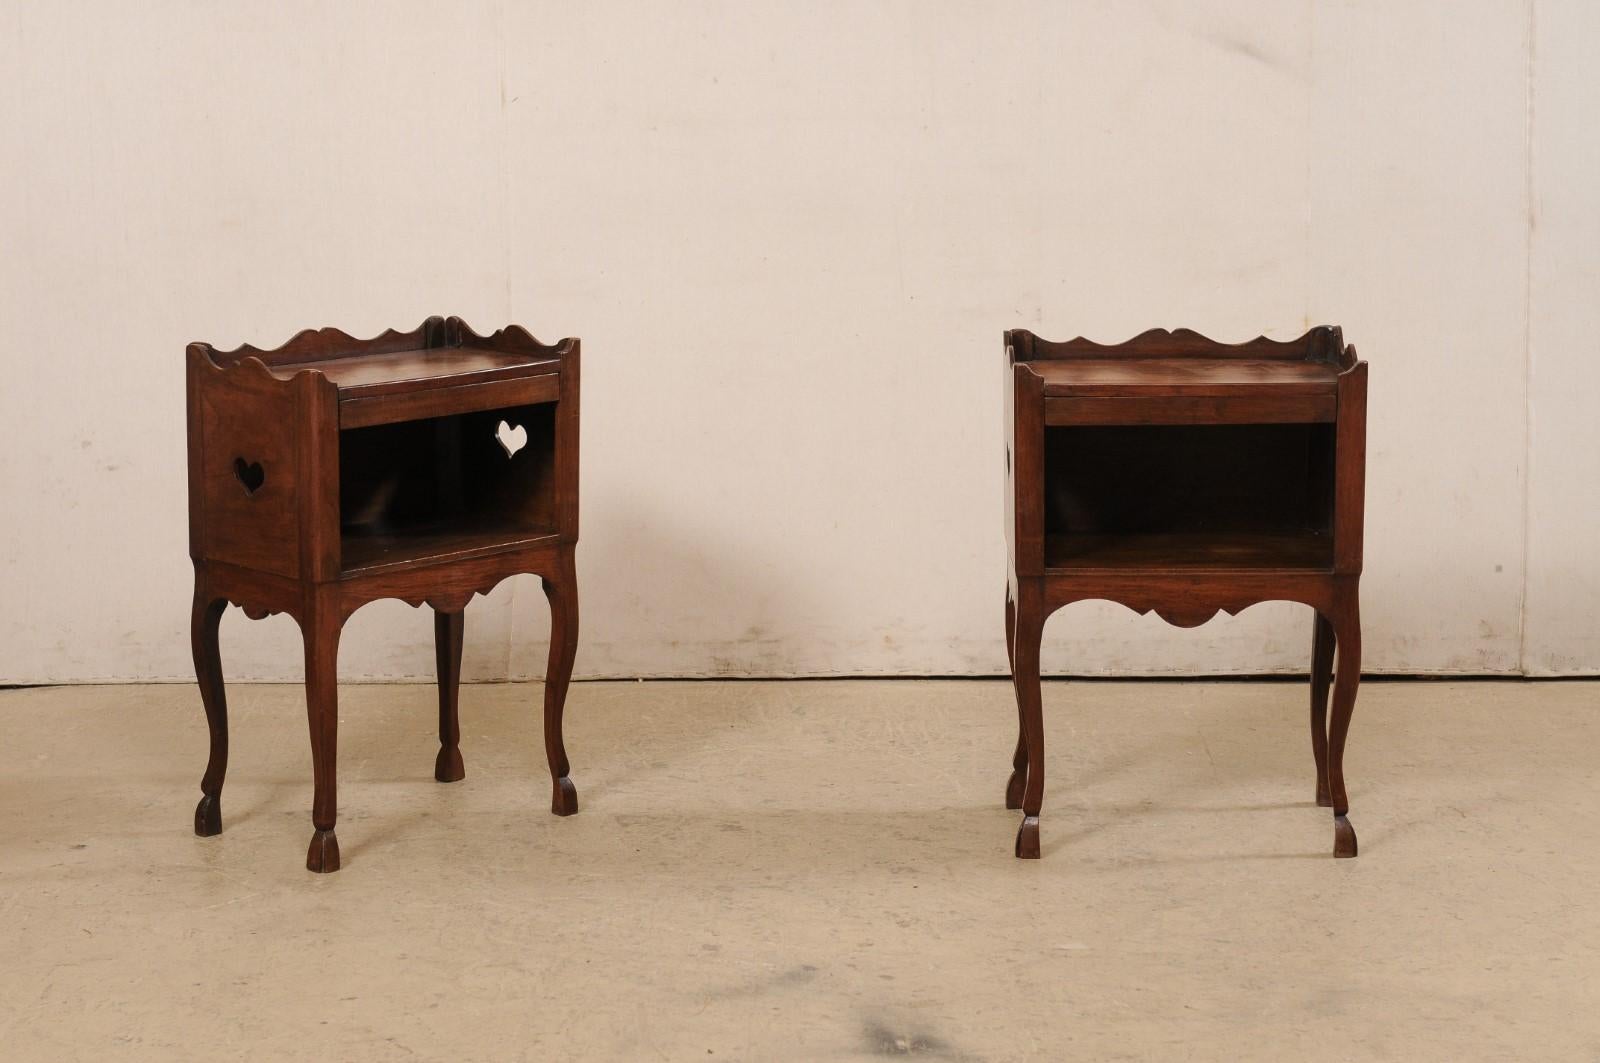 A French pair of carved-wood side tables with open shelf from the turn of the 19th and 20th century. These antique fruitwood tables from France each feature a top with beautifully scalloped raised lip at each side and back, atop a case that houses